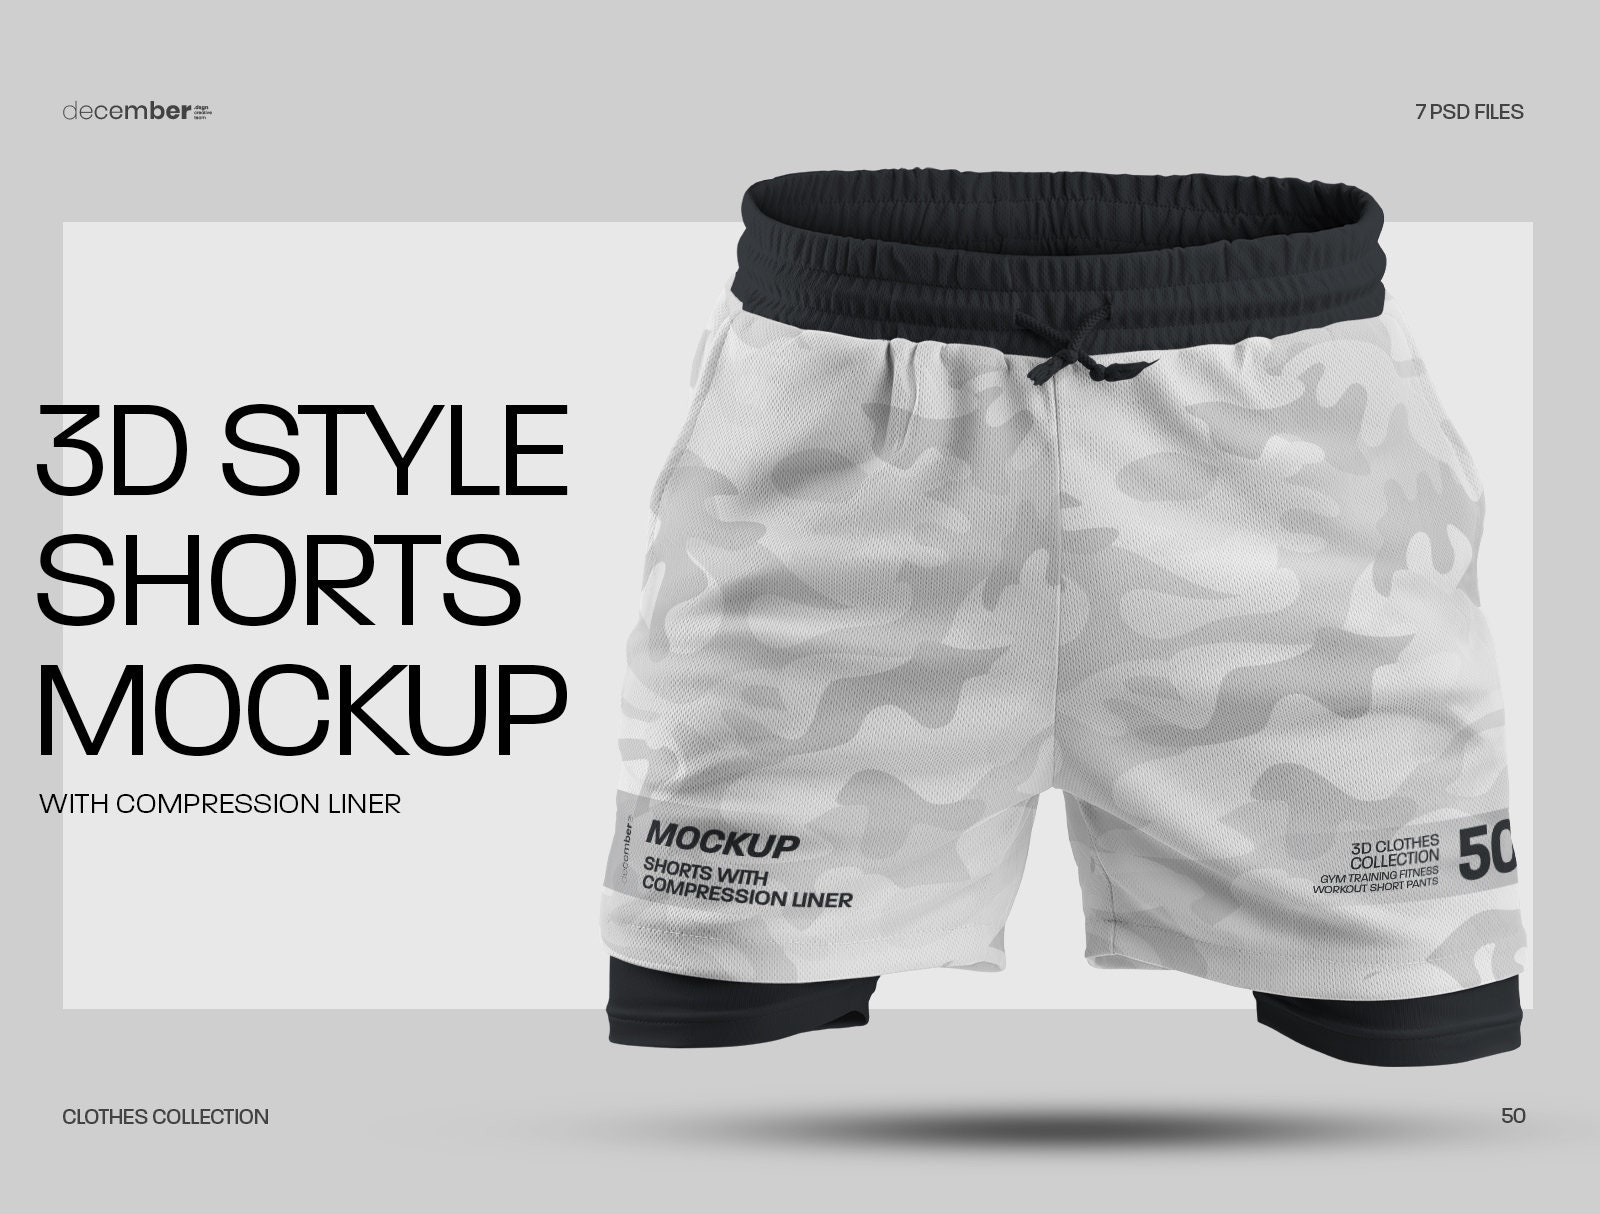 Free Basketball Shorts Mockup Set in PSD for Photoshop